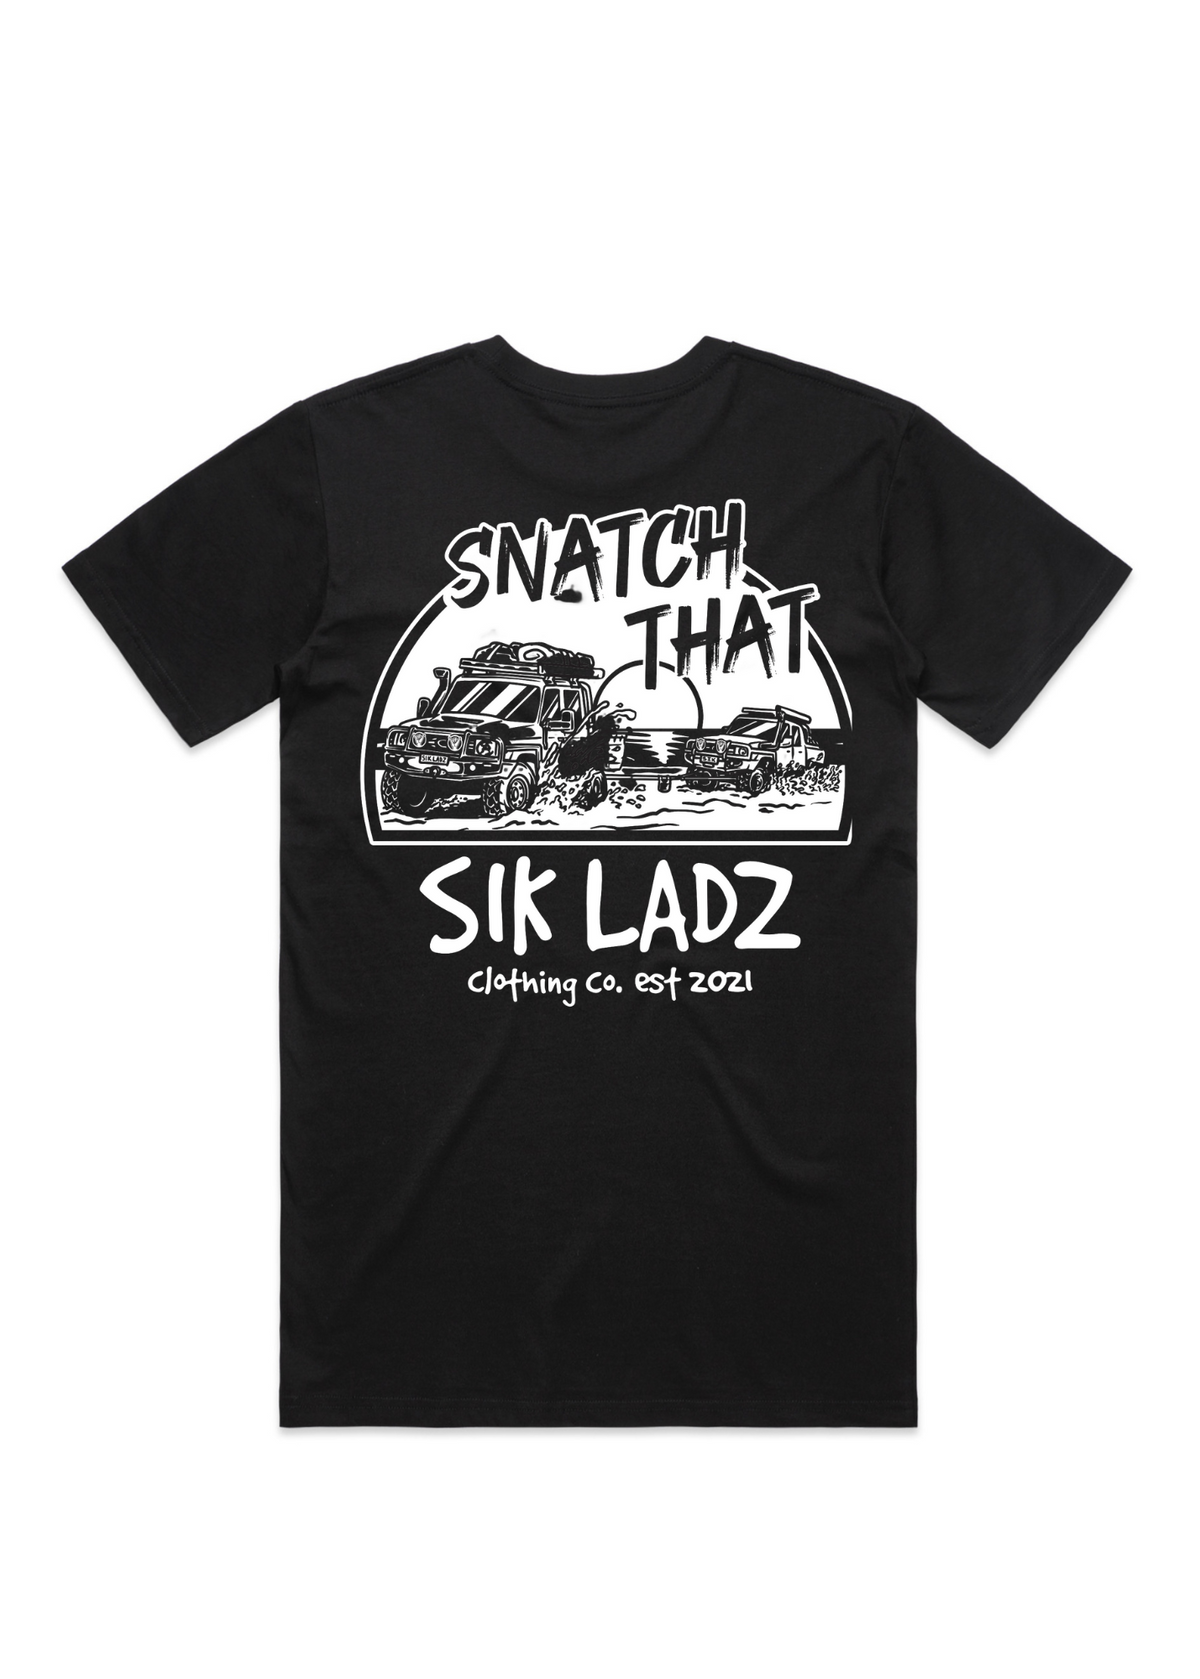 "Snatch That" Tee